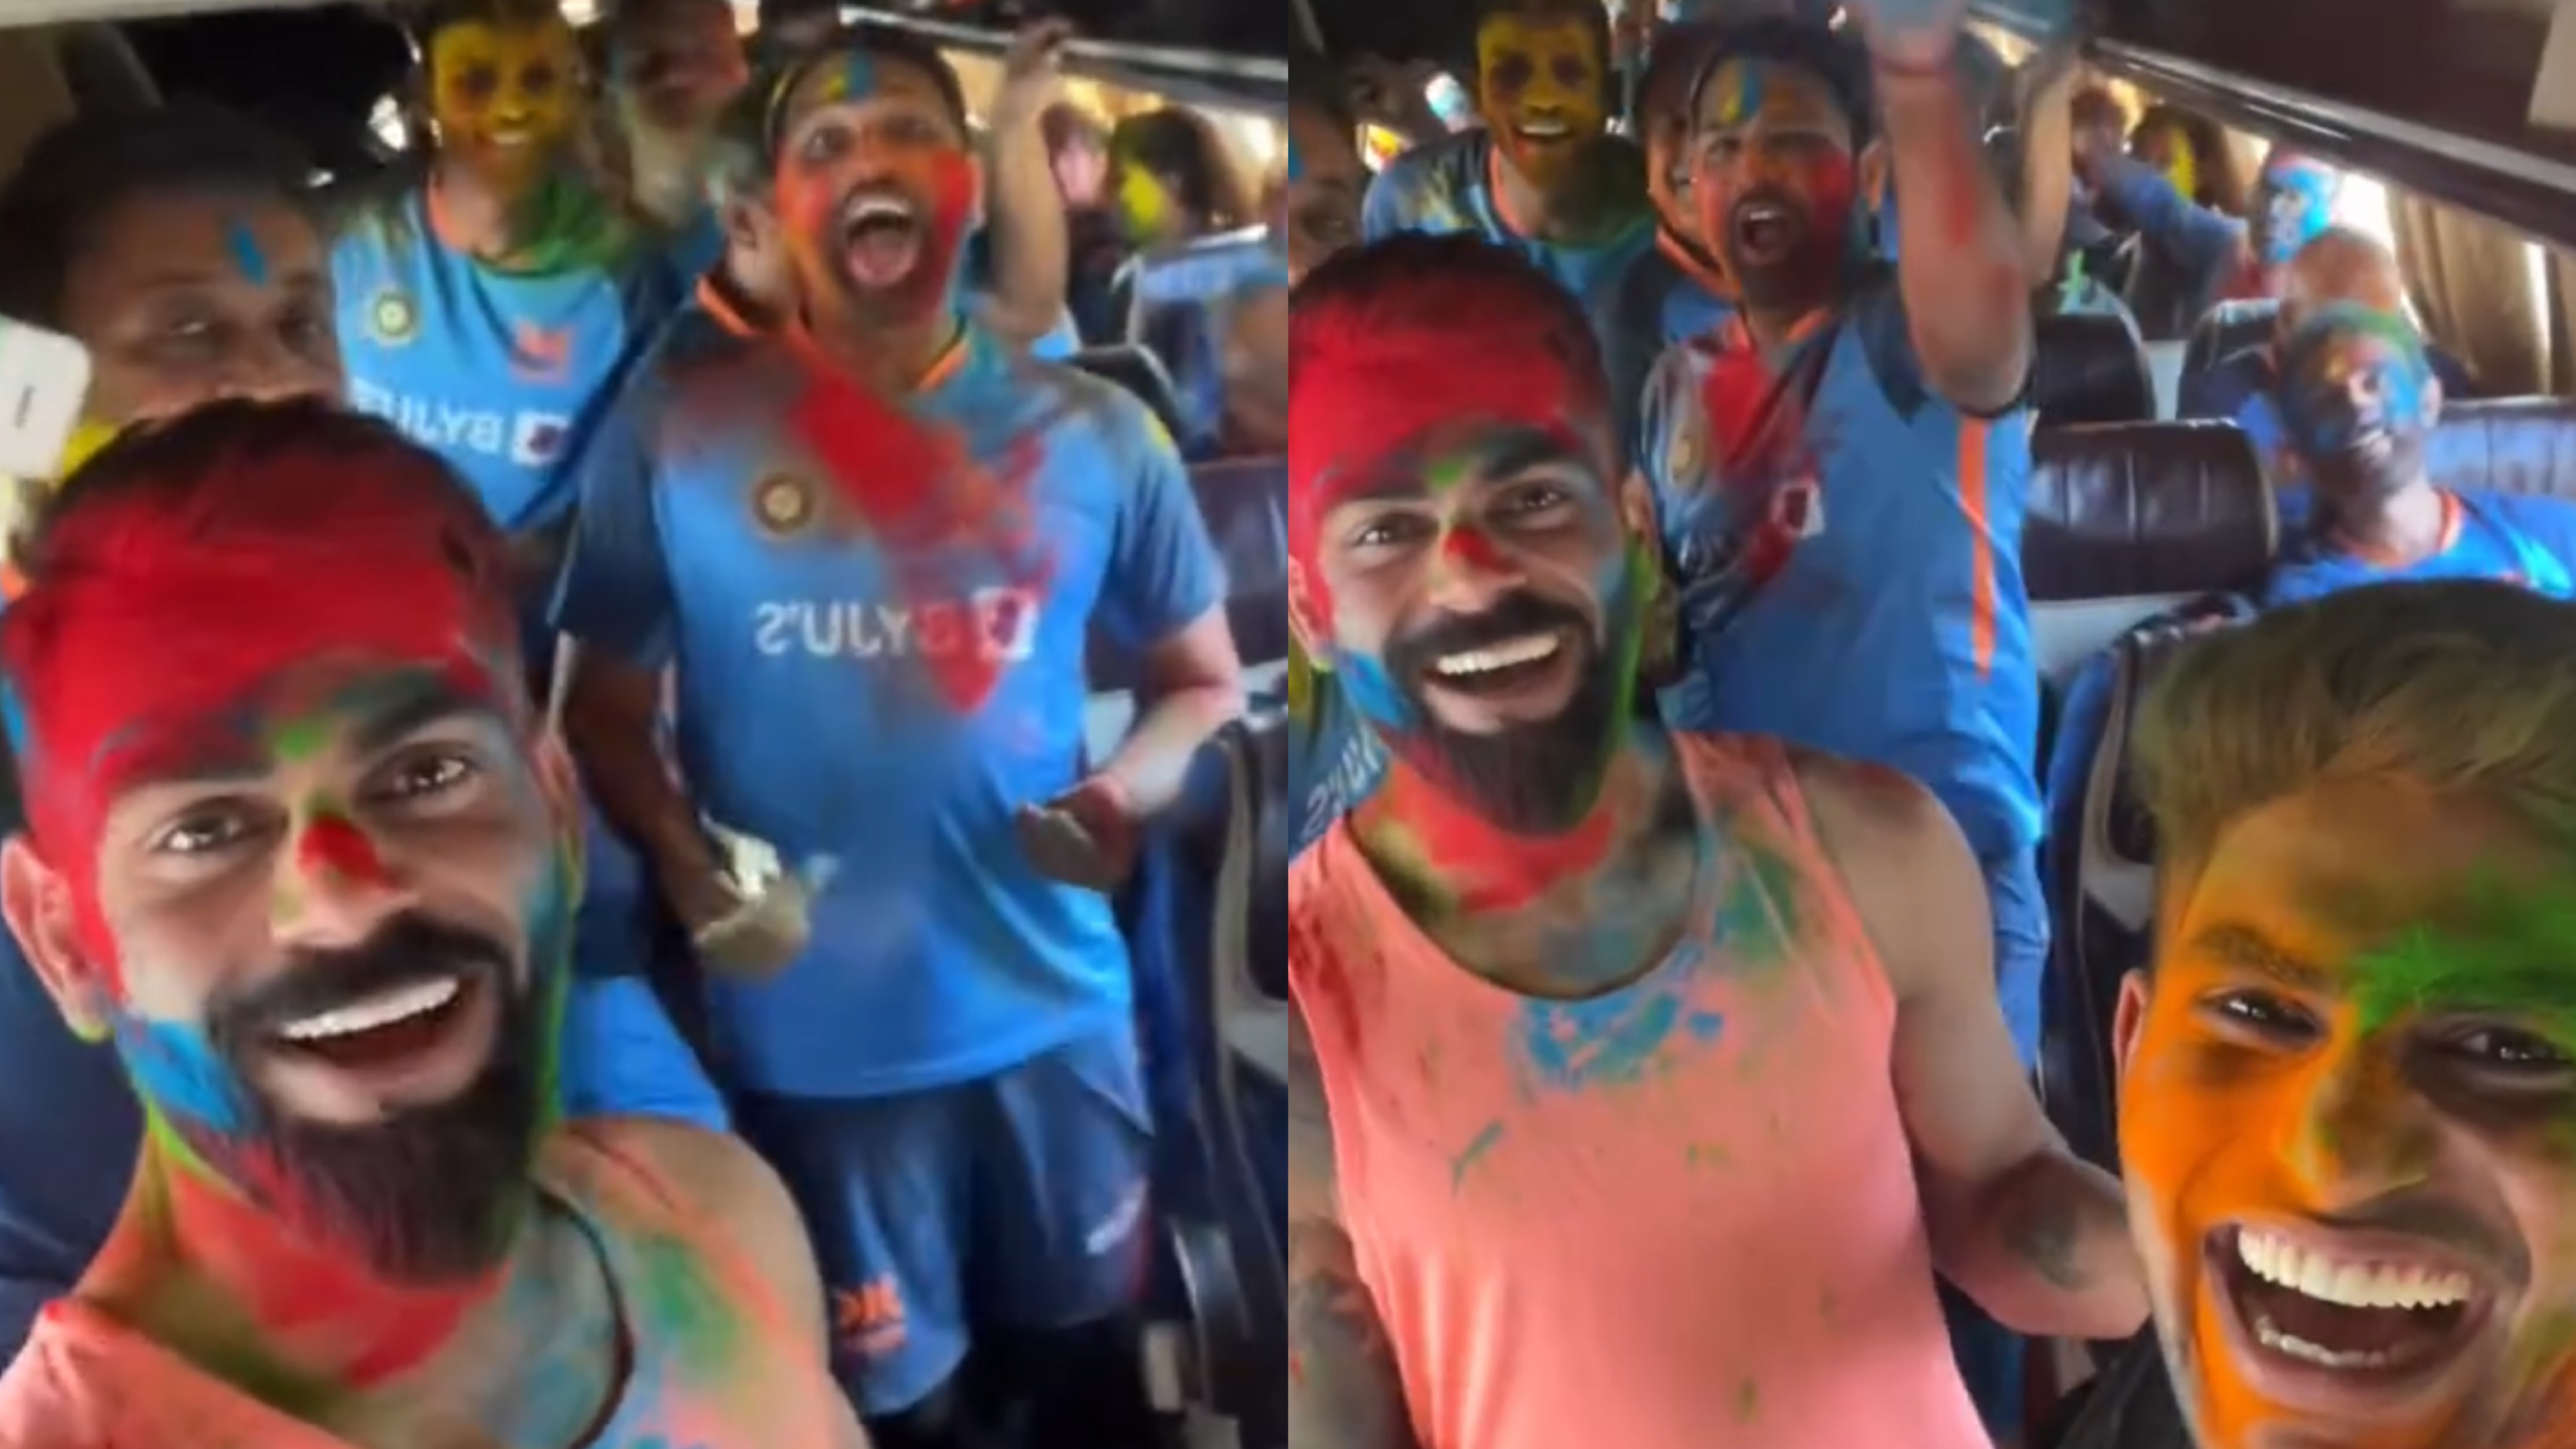 IND v AUS 2023: WATCH - Team India celebrates Holi in dressing room and team bus after practice